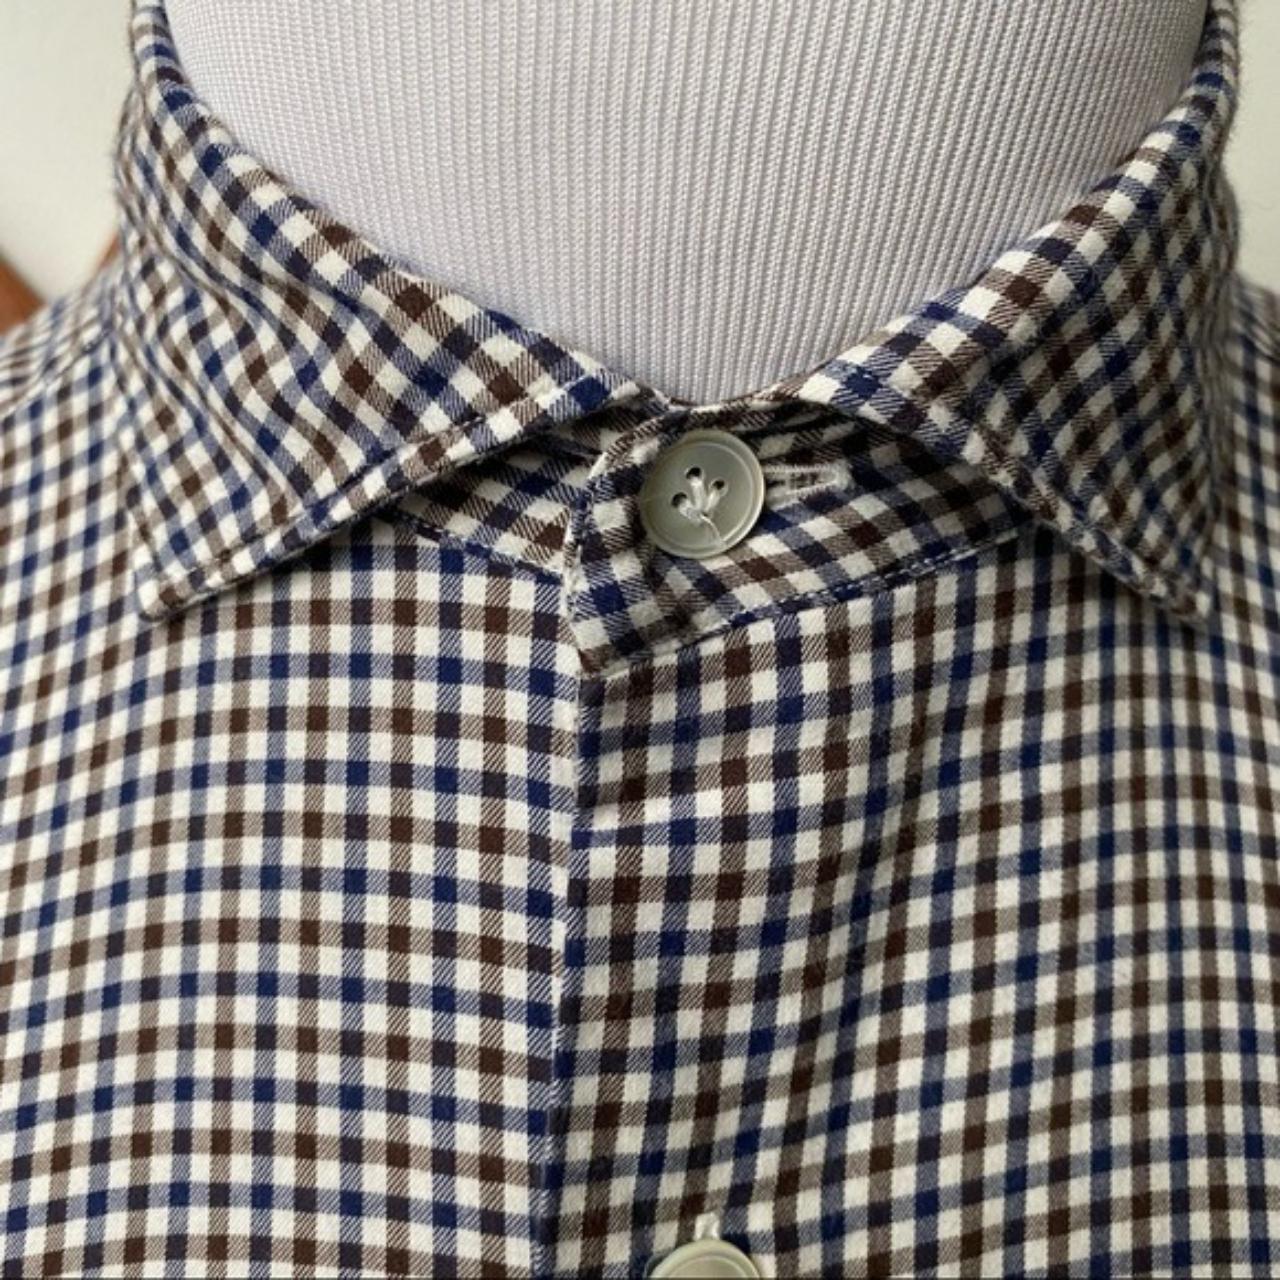 Product Image 3 - Eleventy Checkered Button Down Shirt

Brand: